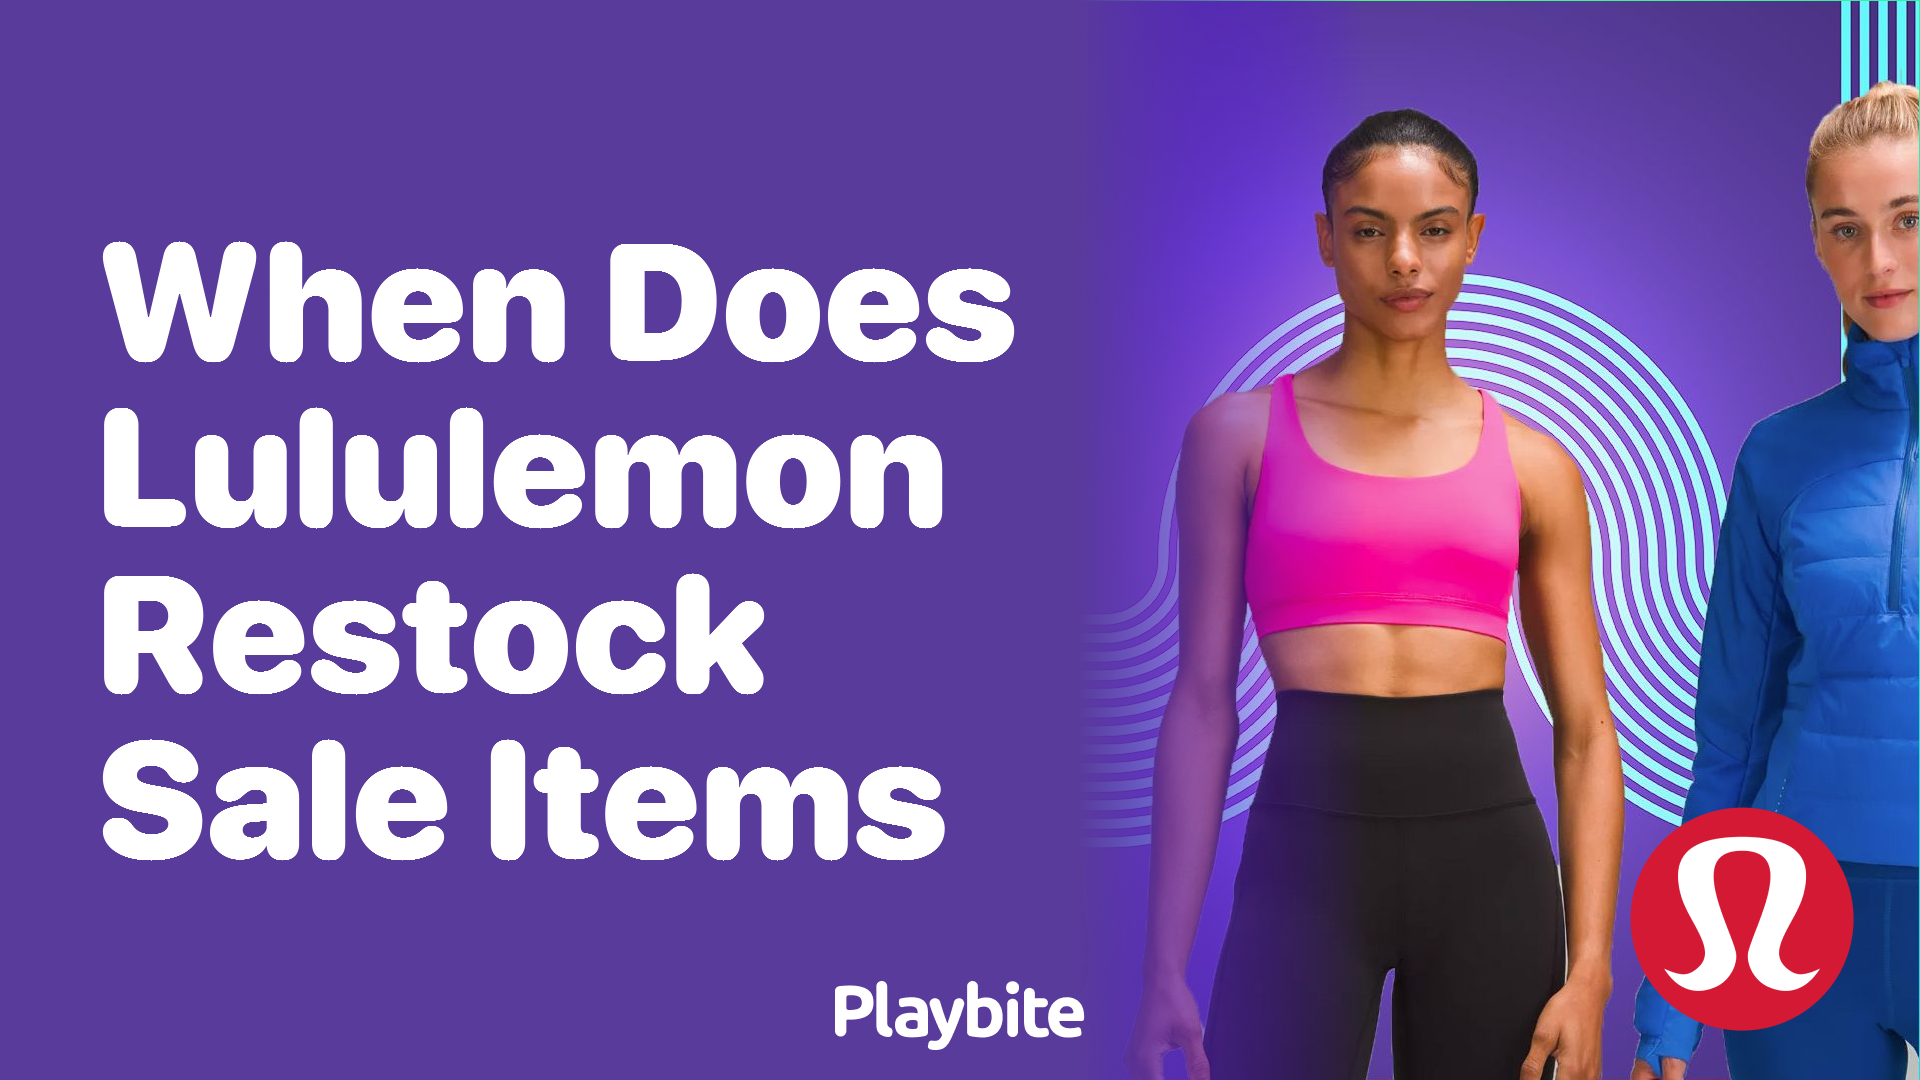 When Does Lululemon Restock Sale Items? Find Out Here! - Playbite